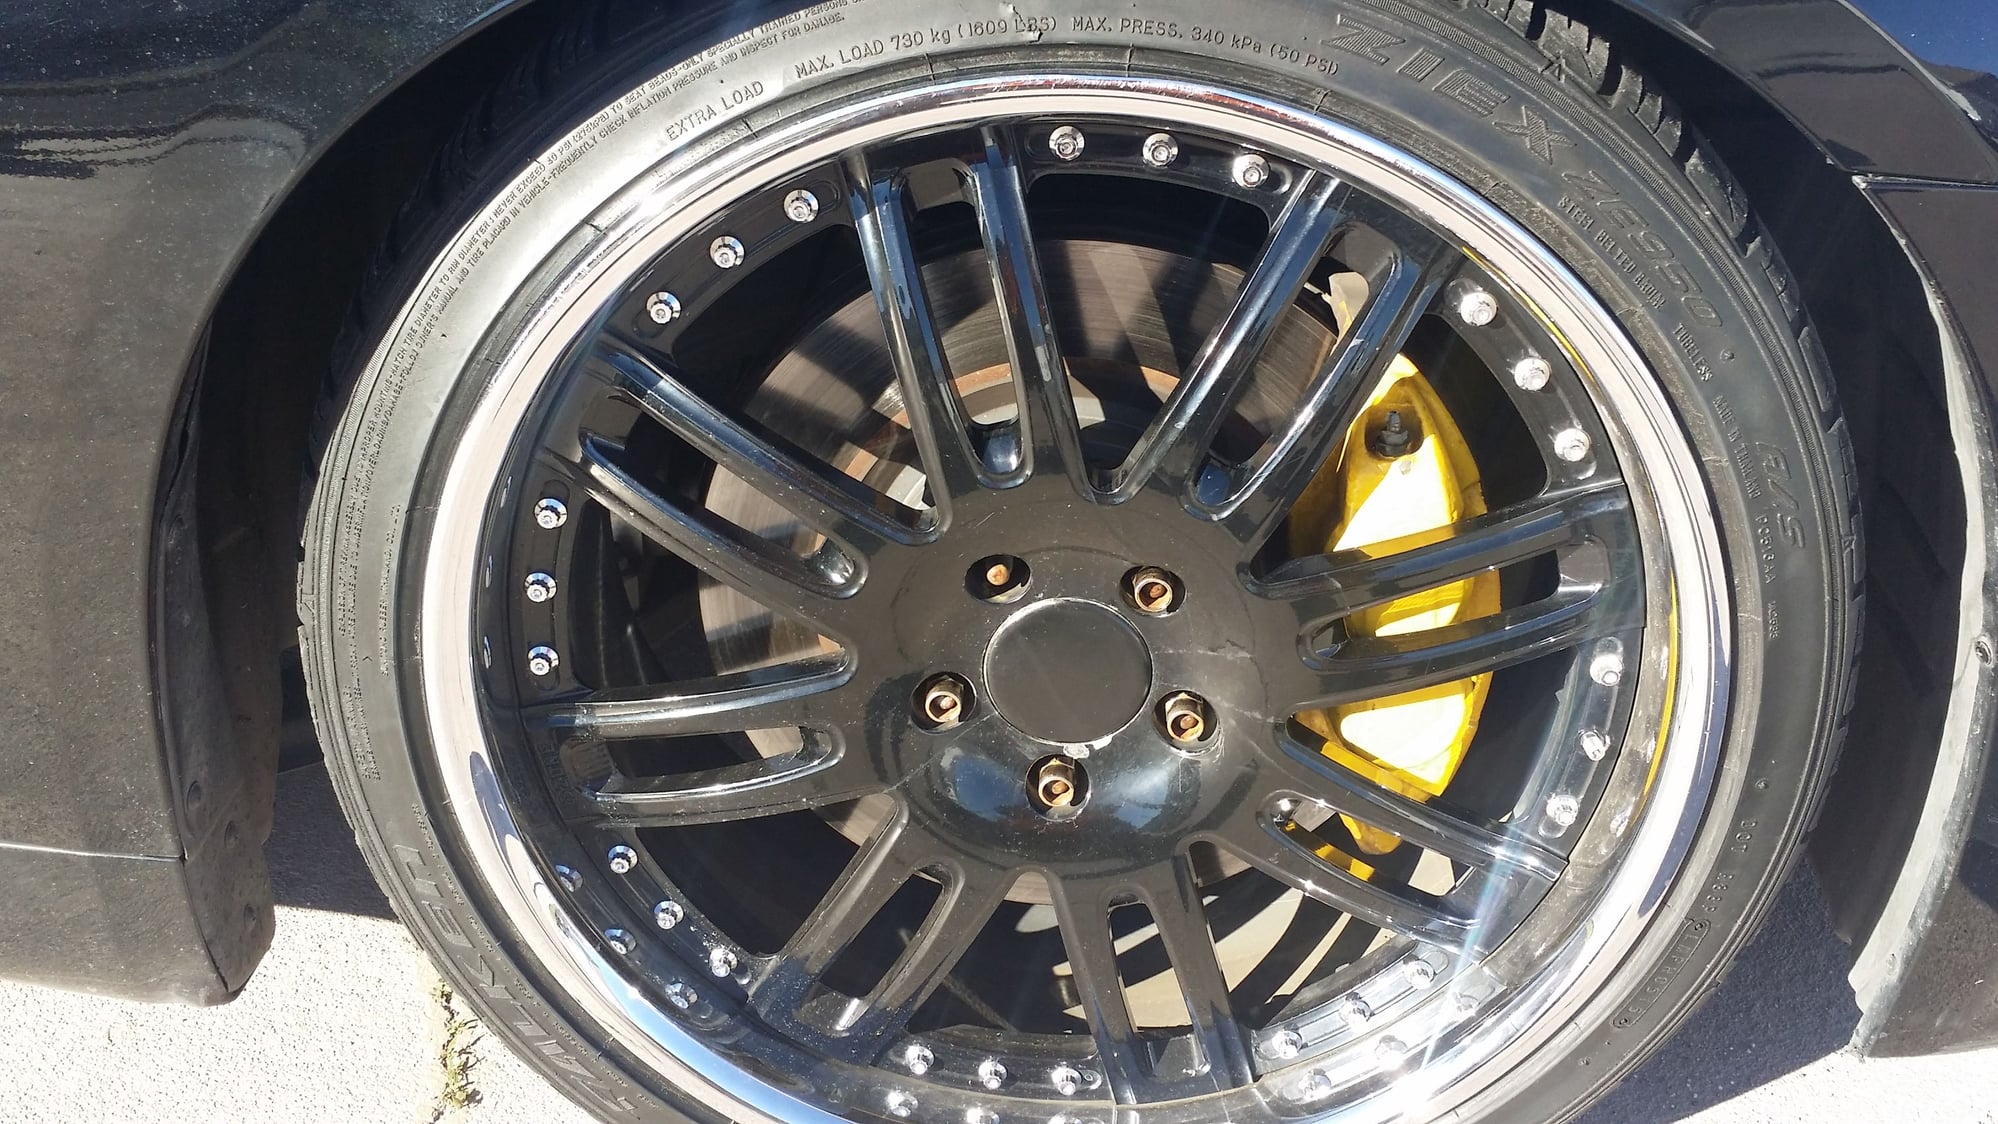 Wheels and Tires/Axles - 20" 3 piece rims w tires... $600 - Used - Spring Hill, FL 34608, United States